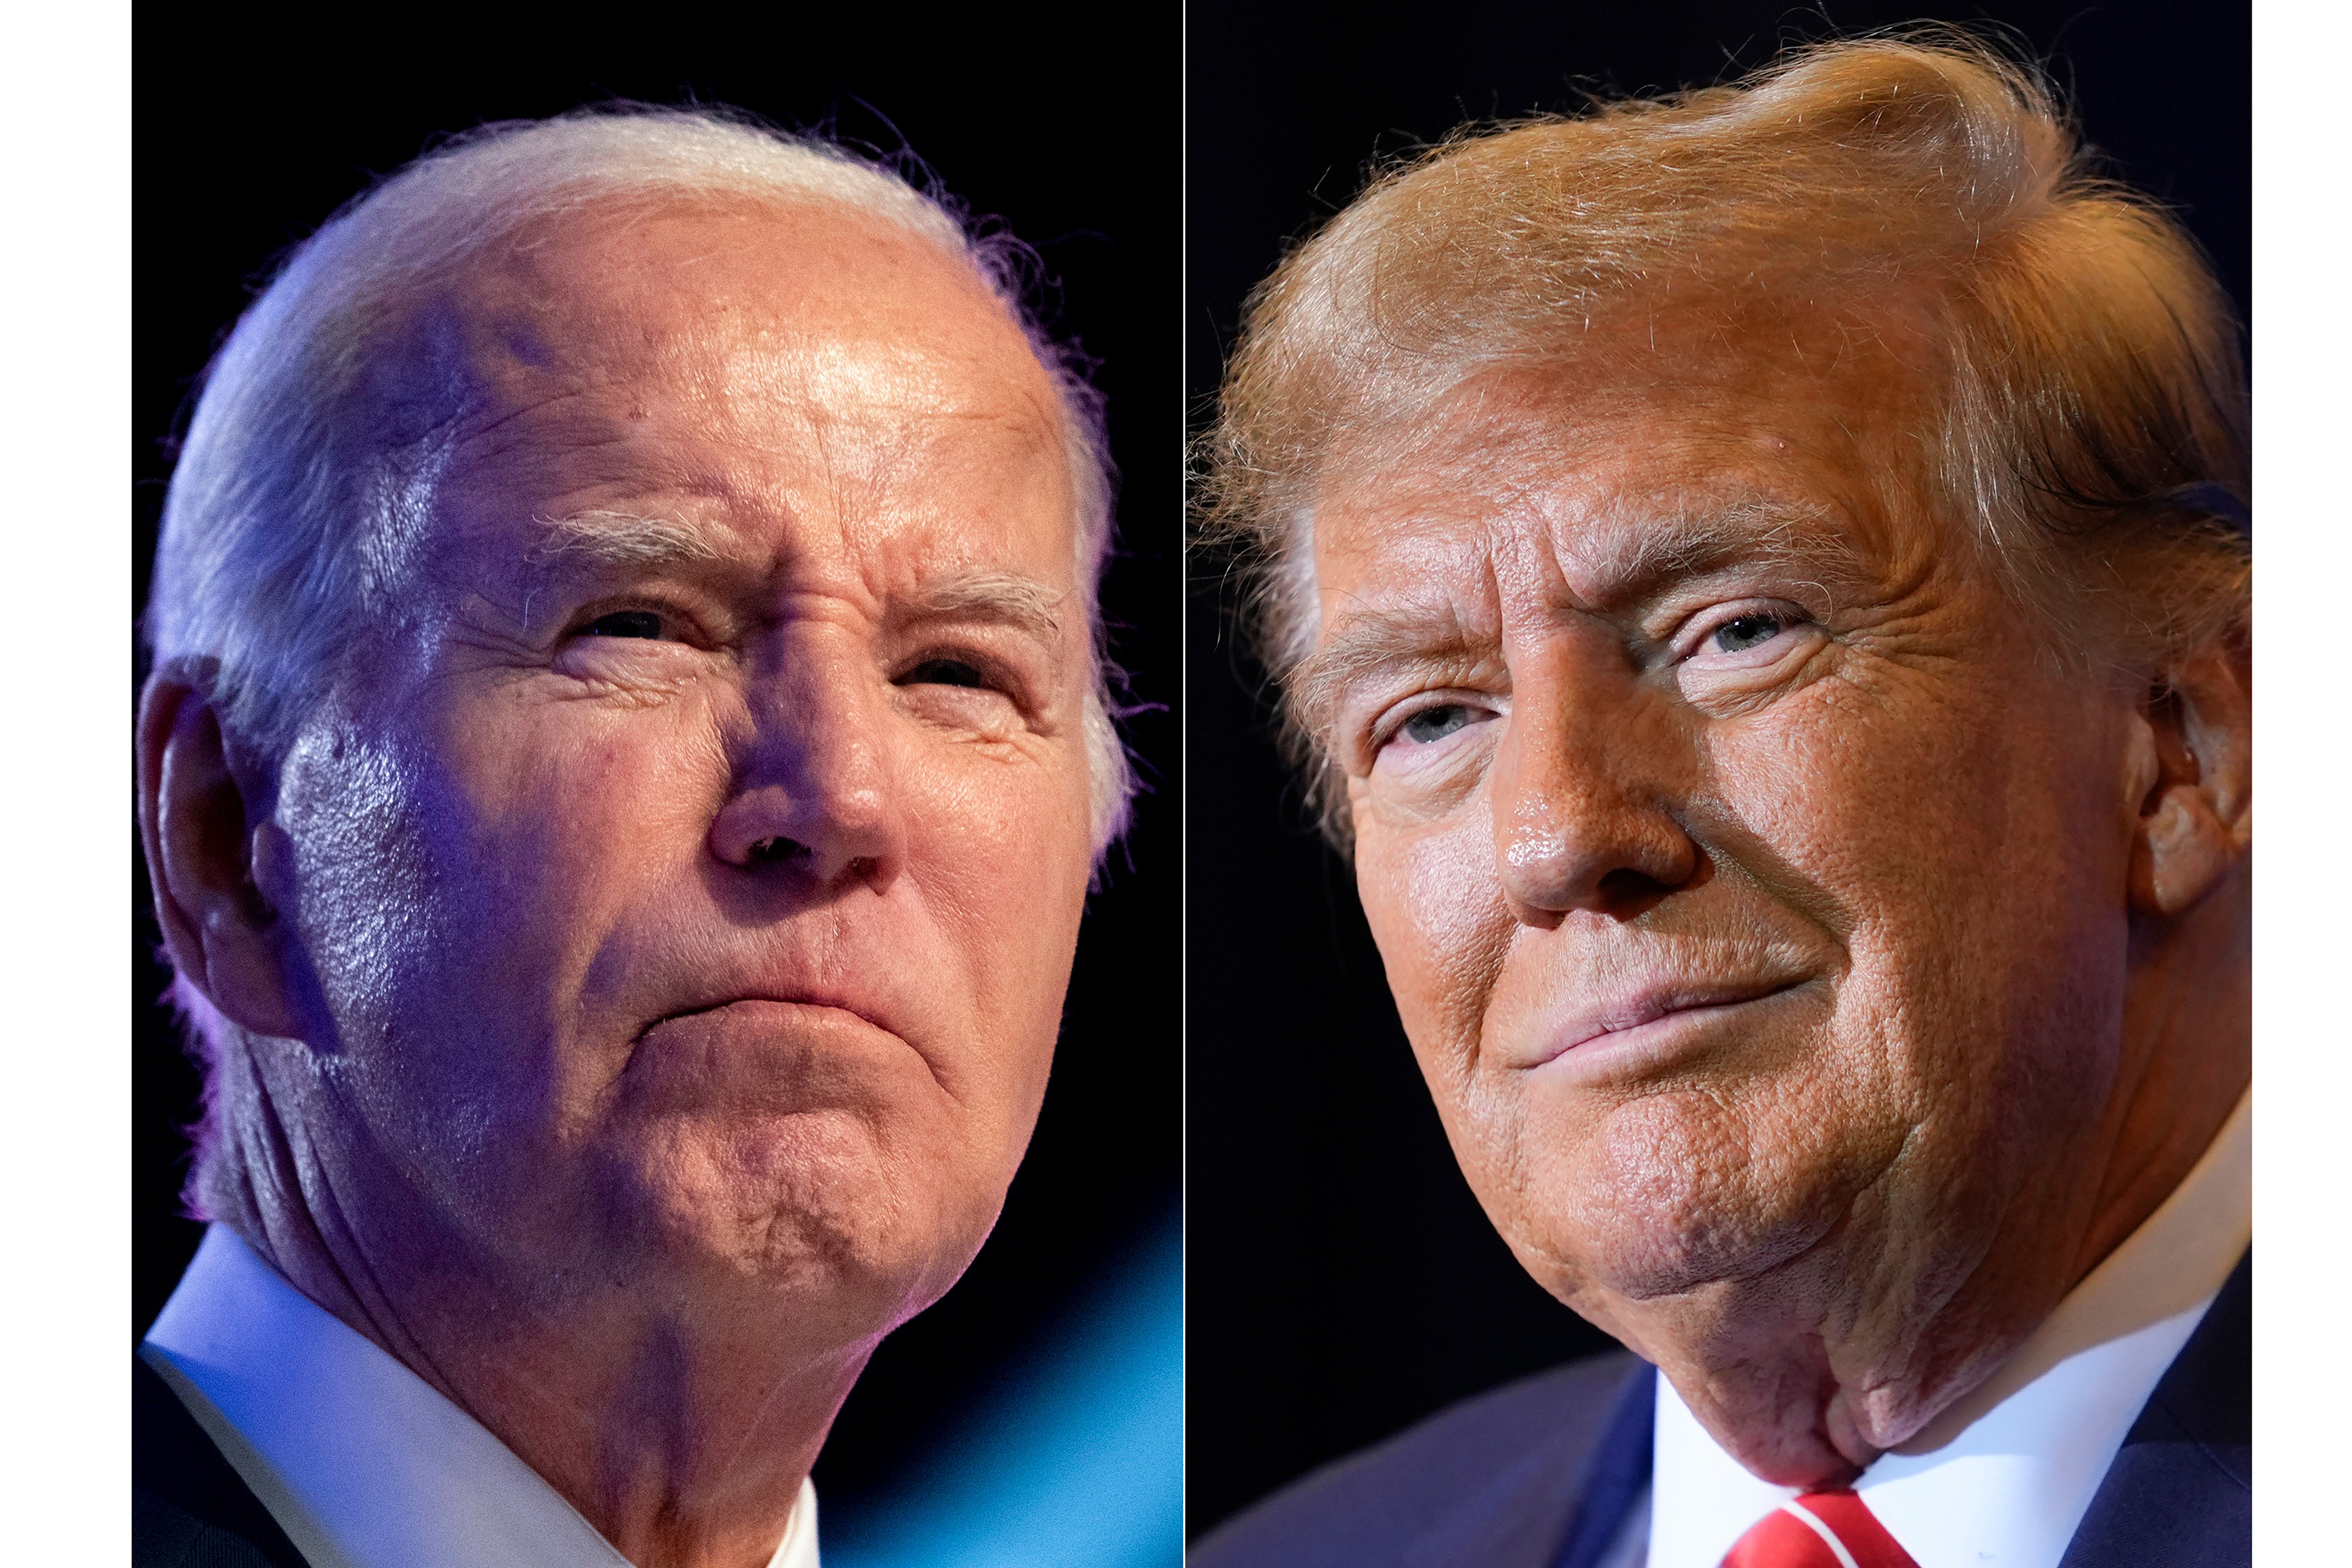 Joe Biden (left) and Donald Trump (right) are headed for a rematch